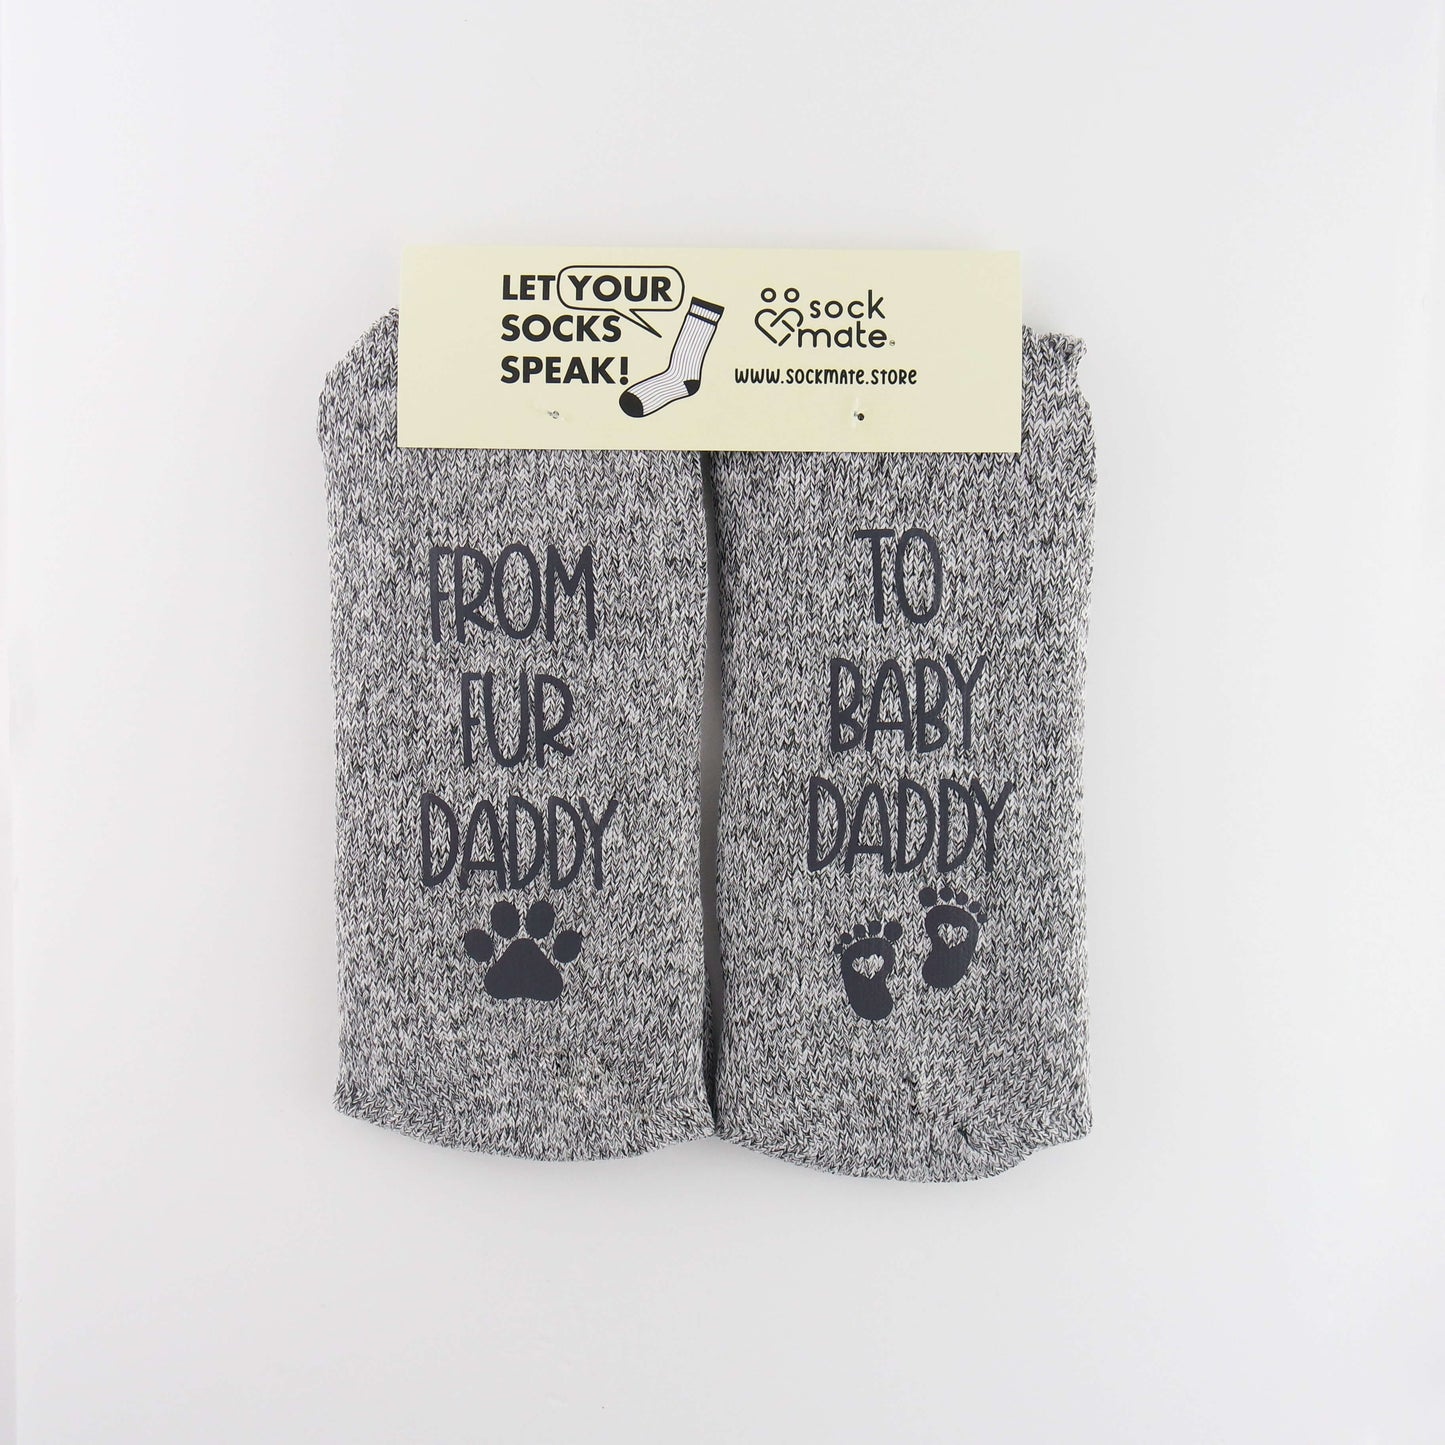 "From Fur Daddy to Baby Daddy" New Dad Socks